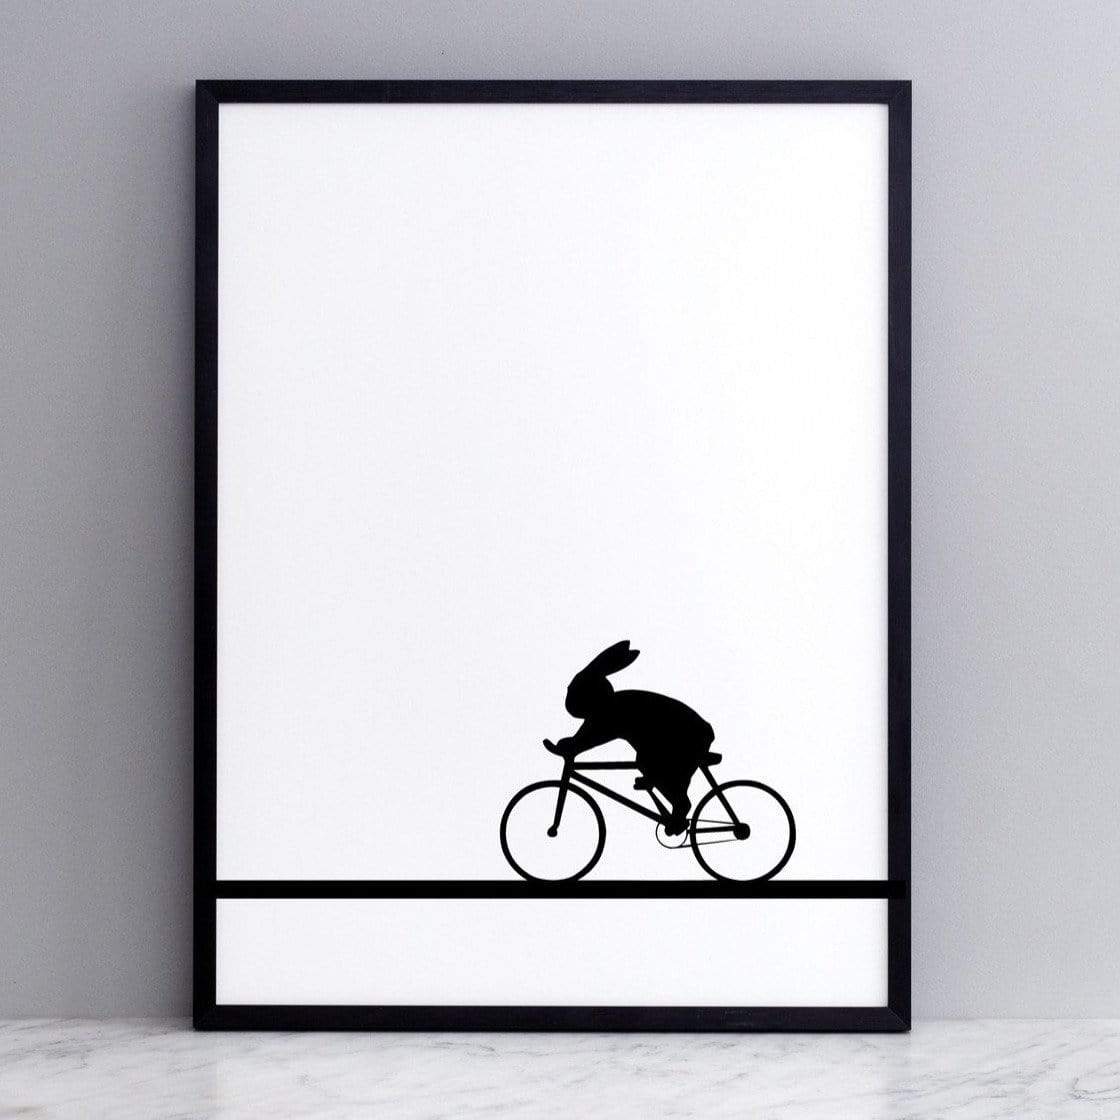 black and white image of HAM rabbit racing along on his bike.  Fun and playful series of prints.  Ideal for adults and children. Pictured here on marble surface with grey painted wall backdrop.